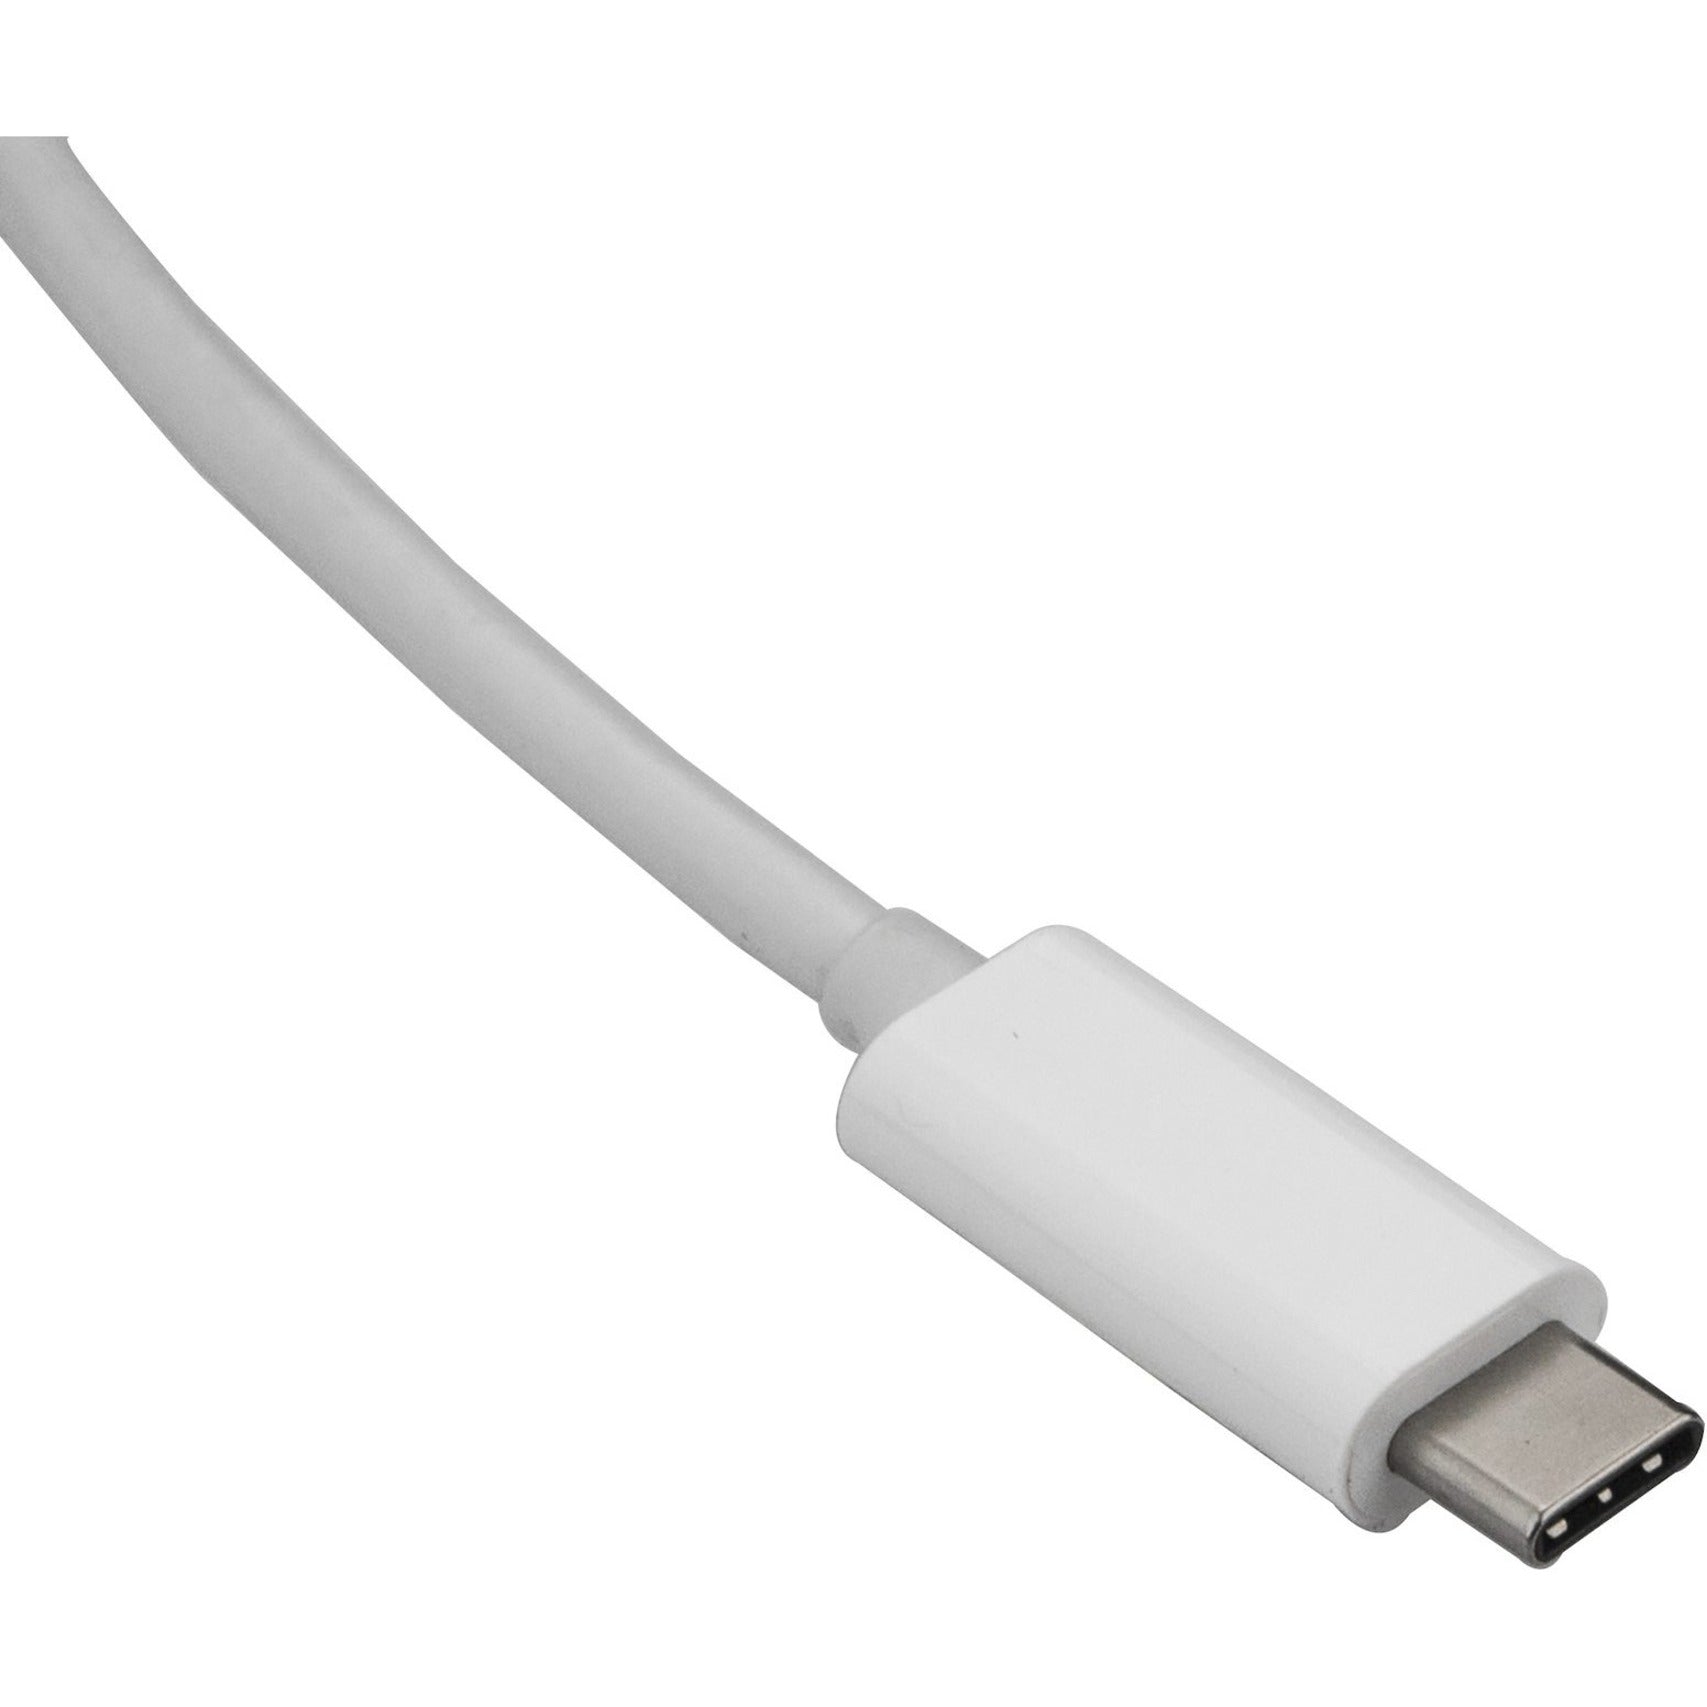 StarTech.com CDP2HD2MWNL 2m USB-C to HDMI Cable - 4K at 60Hz, White